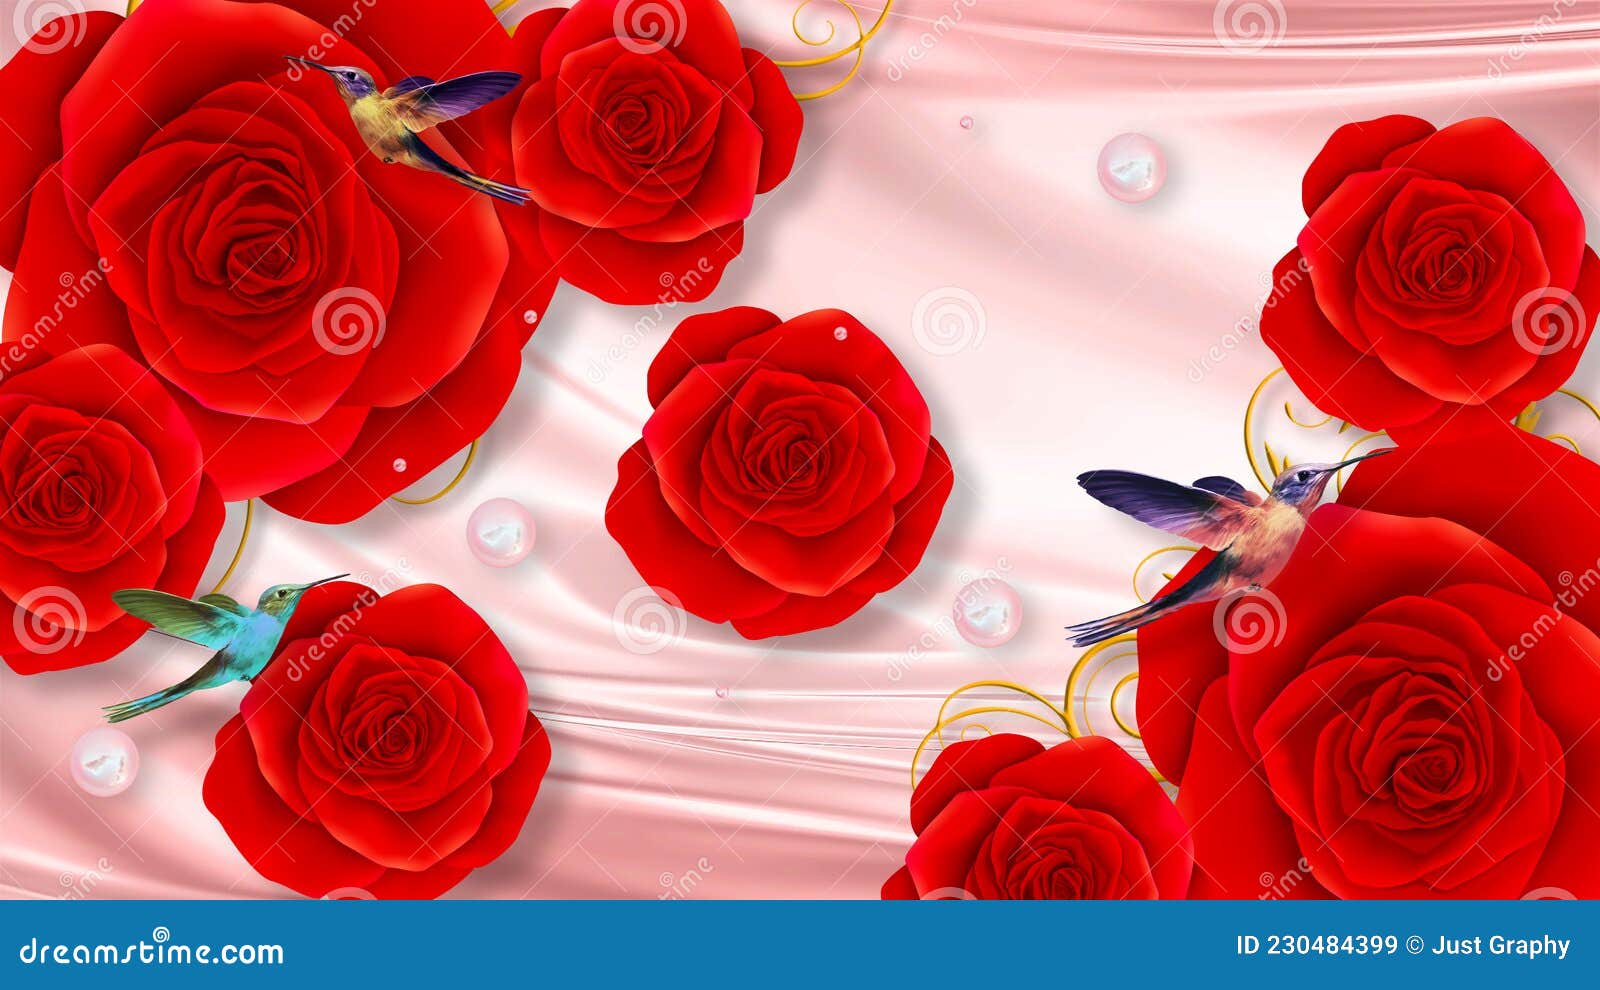 3d Wallpaper Design with Beautiful Red Rose Flower, Bird and Pearl ...